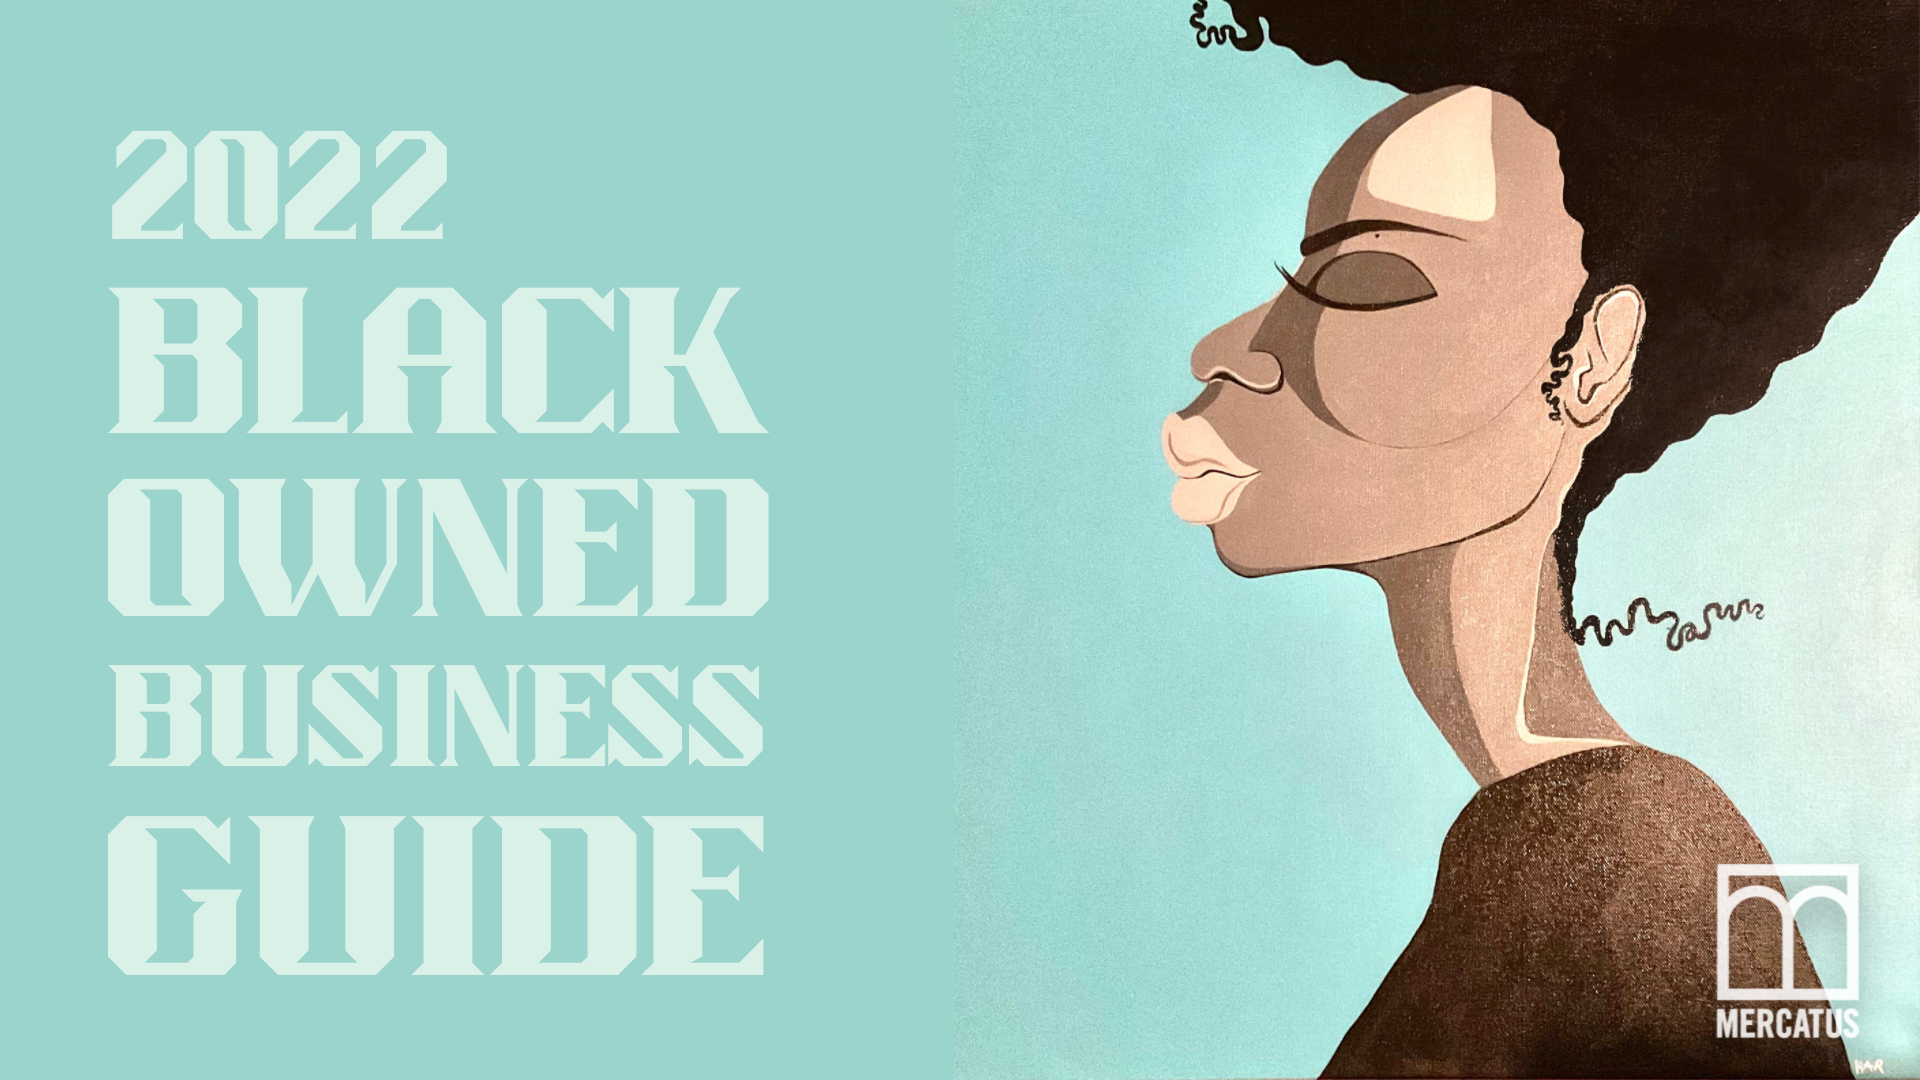 Black Owned Business Guide Graphic